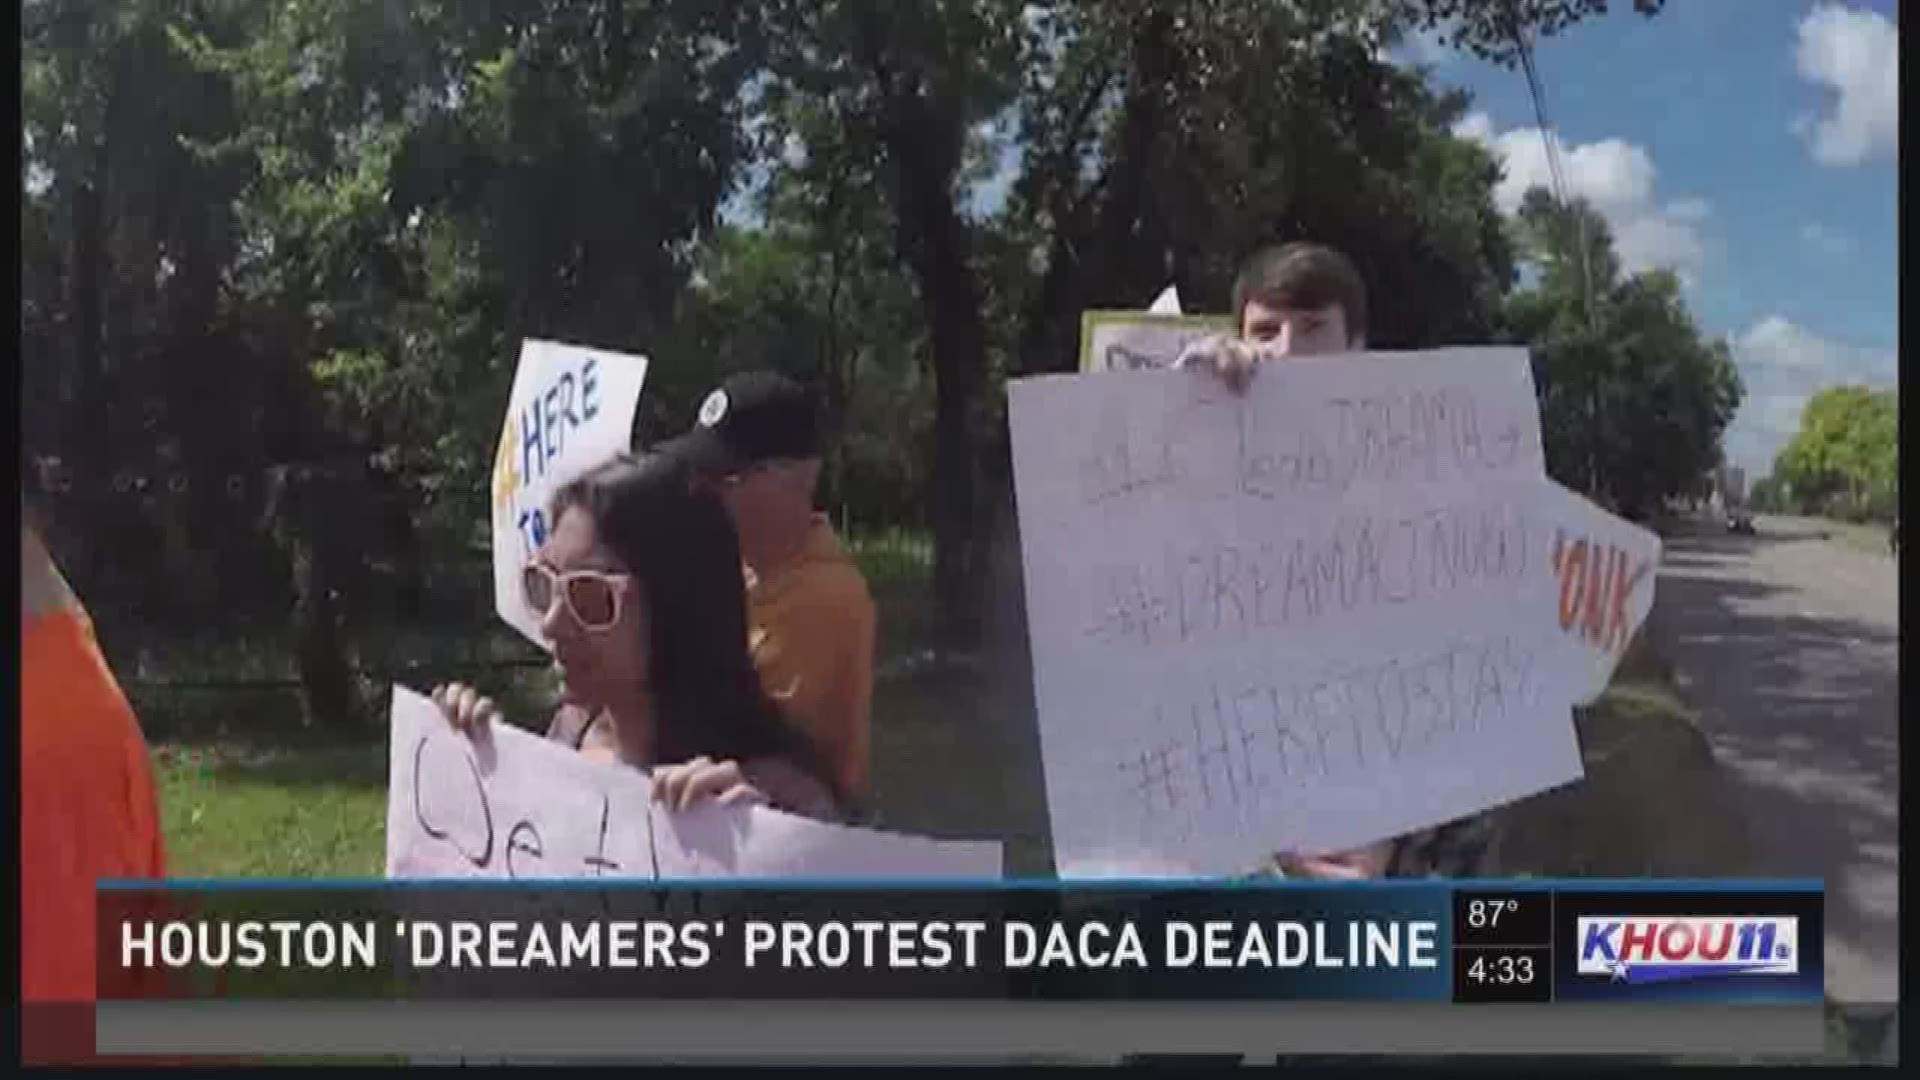 Dozens of DACA recipients and their allies marched to Sen. Cornyn's office on Thursday to protest the DACA deadline. 